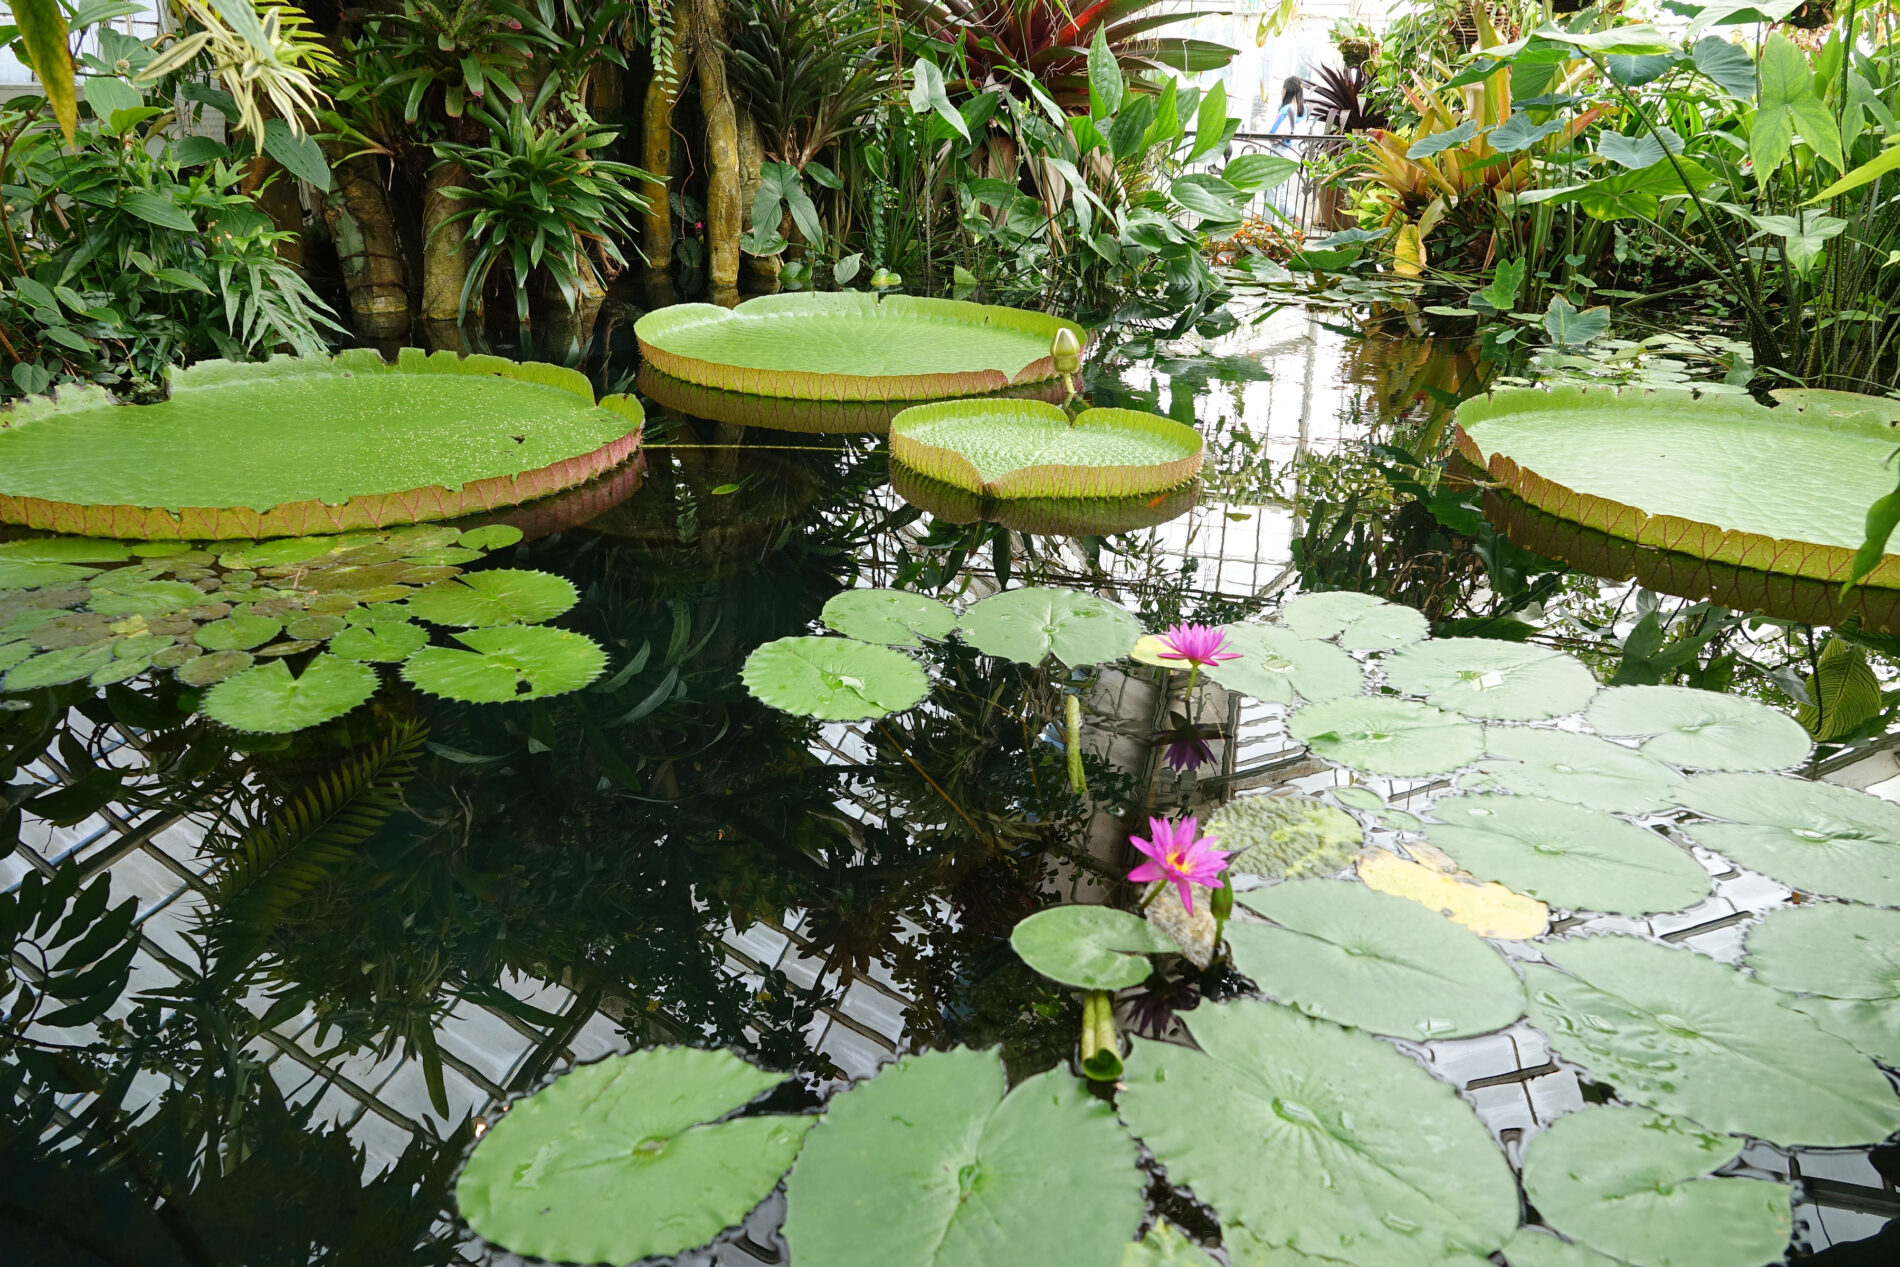 Water lilies and giant lily pads in the Conservatory of Flowers in Golden Gate Park.